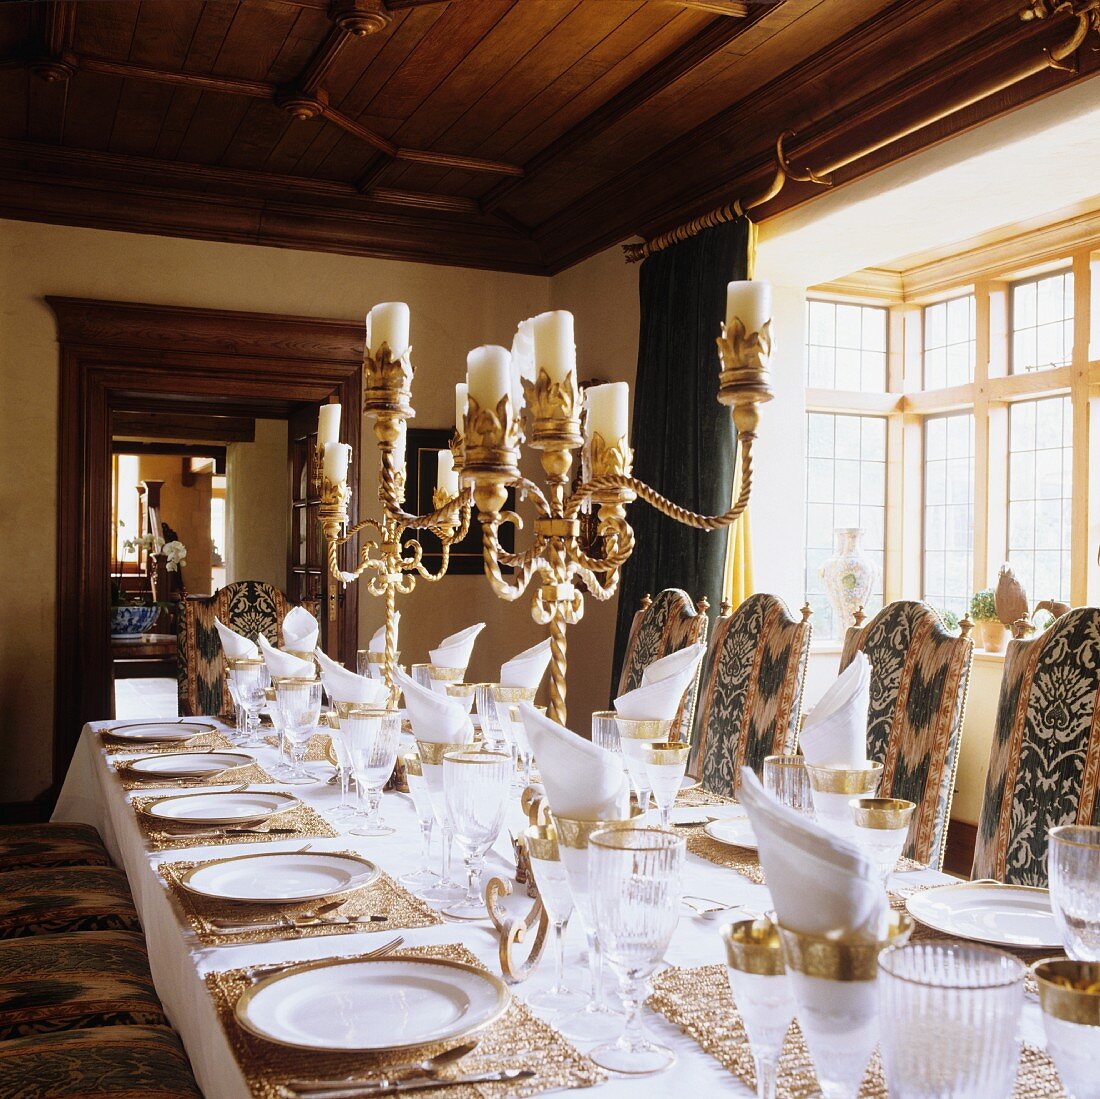 A festively laid table with silver candle sticks in the dining room of a country house